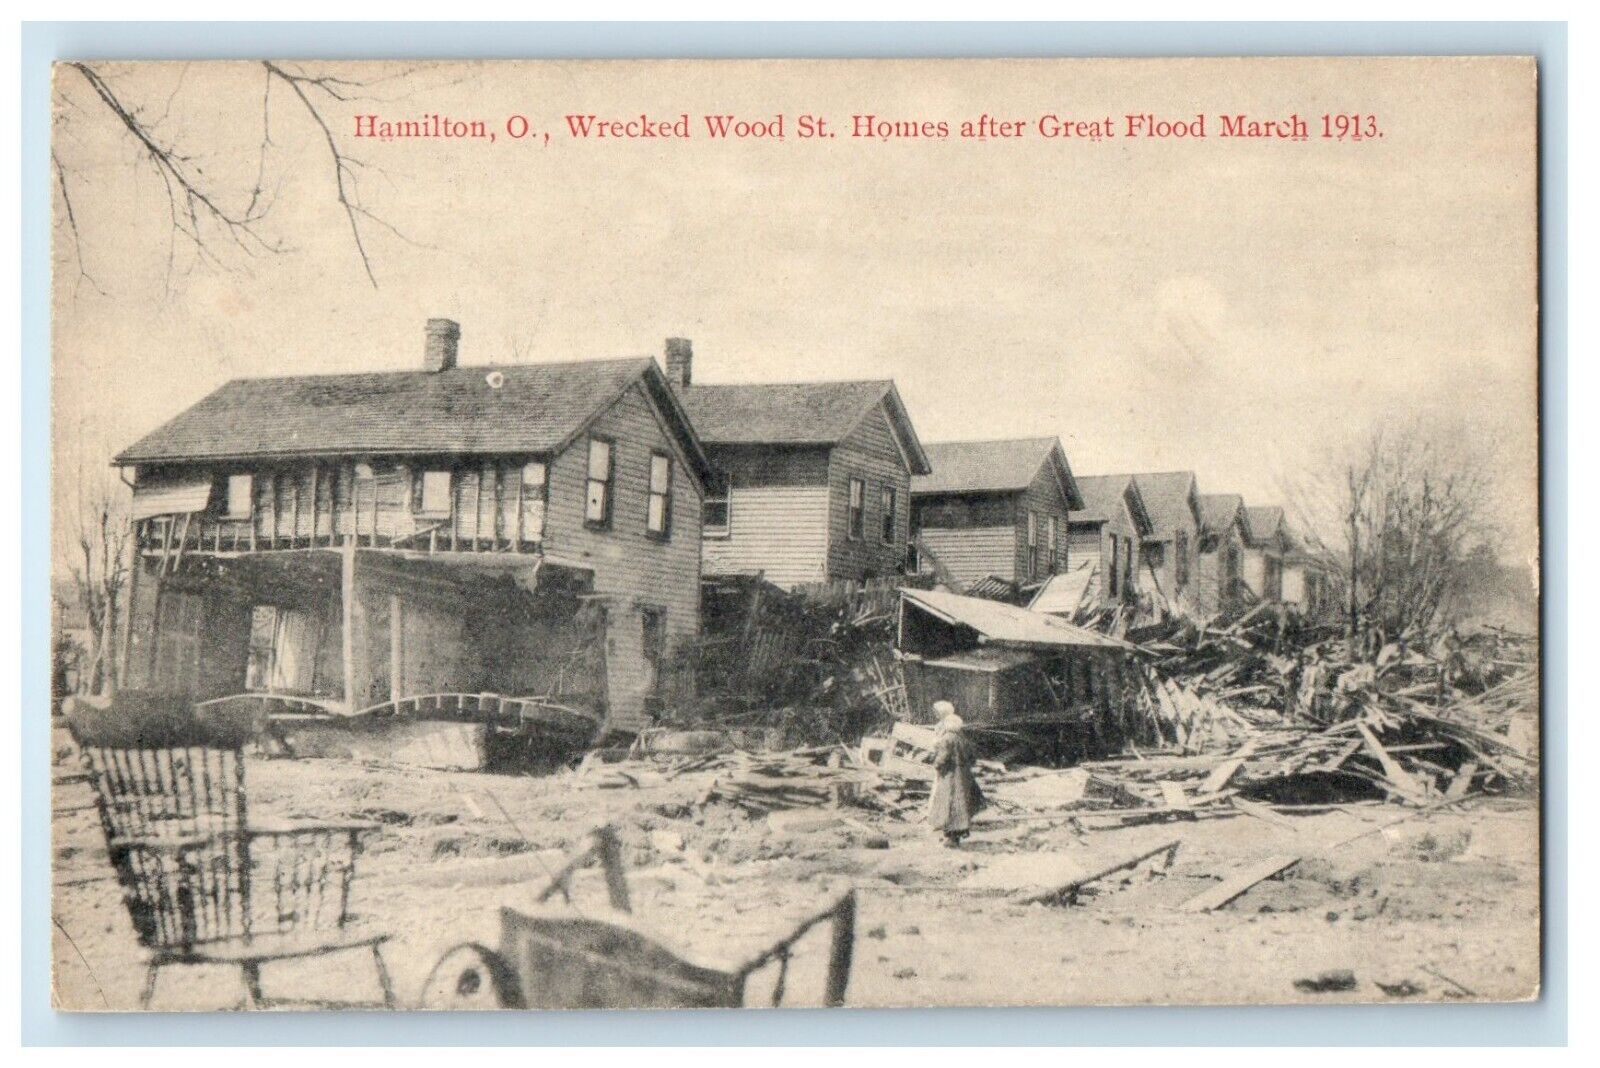 1913 Wrecked Wood St. Homes after Great Flood Hamilton Ohio OH Postcard